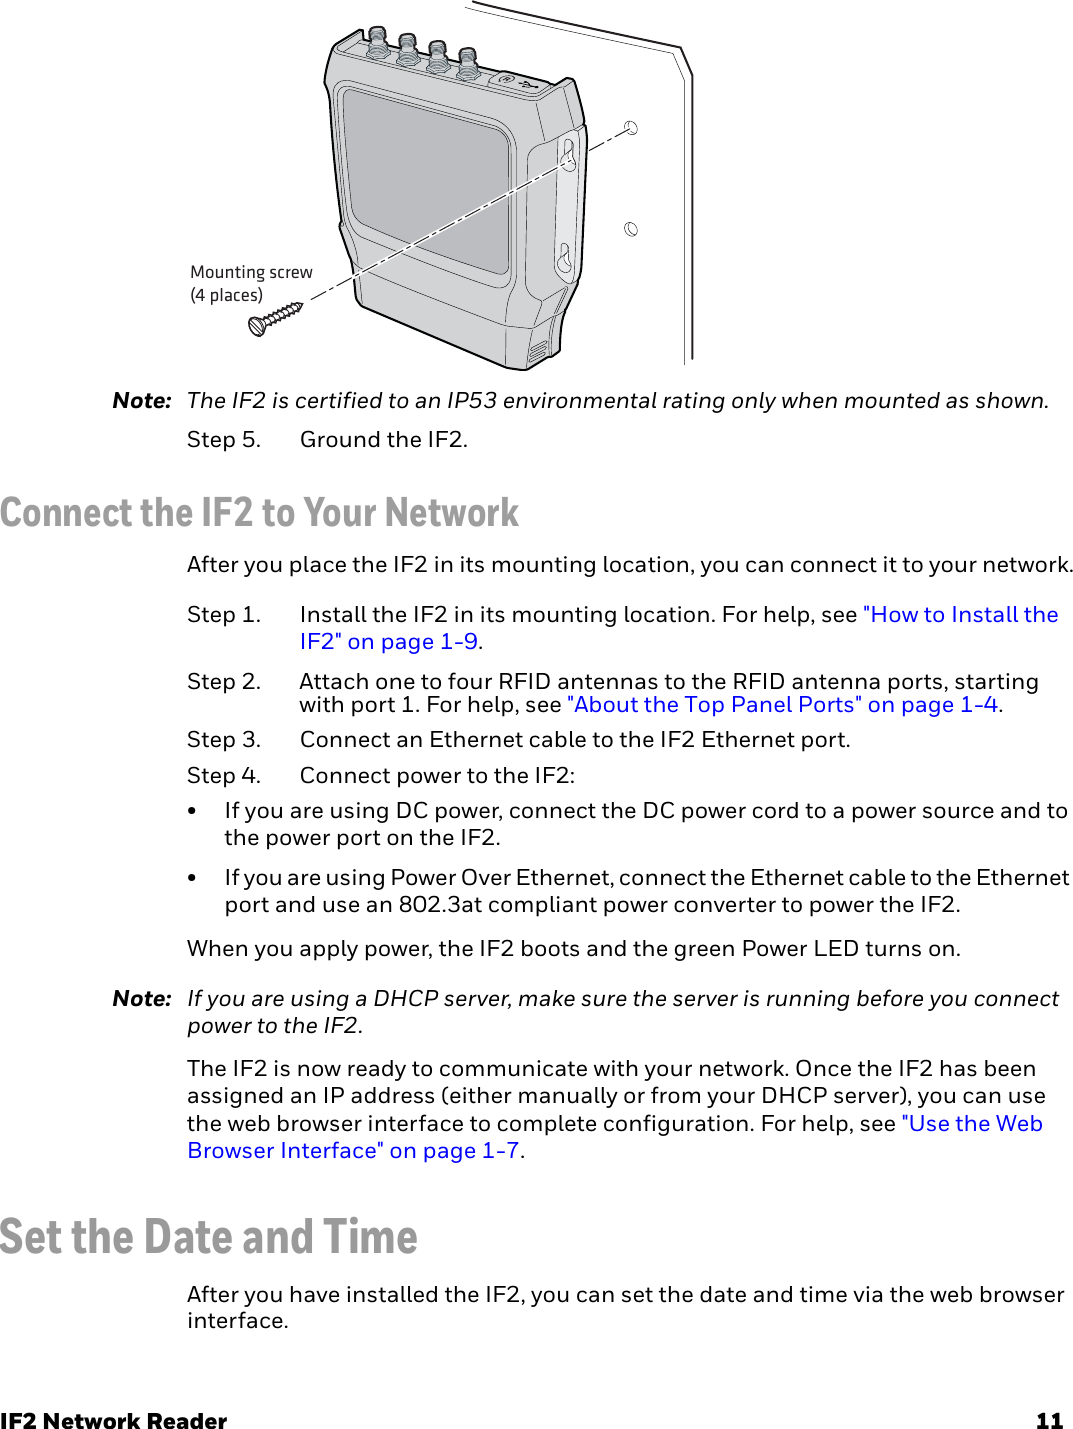 IF2 Network Reader 11Note: The IF2 is certified to an IP53 environmental rating only when mounted as shown.Step 5. Ground the IF2.Connect the IF2 to Your NetworkAfter you place the IF2 in its mounting location, you can connect it to your network.Step 1. Install the IF2 in its mounting location. For help, see &quot;How to Install the IF2&quot; on page 1-9.Step 2. Attach one to four RFID antennas to the RFID antenna ports, starting with port 1. For help, see &quot;About the Top Panel Ports&quot; on page 1-4.Step 3. Connect an Ethernet cable to the IF2 Ethernet port. Step 4. Connect power to the IF2:• If you are using DC power, connect the DC power cord to a power source and to the power port on the IF2. • If you are using Power Over Ethernet, connect the Ethernet cable to the Ethernet port and use an 802.3at compliant power converter to power the IF2.When you apply power, the IF2 boots and the green Power LED turns on.Note: If you are using a DHCP server, make sure the server is running before you connect power to the IF2.The IF2 is now ready to communicate with your network. Once the IF2 has been assigned an IP address (either manually or from your DHCP server), you can use the web browser interface to complete configuration. For help, see &quot;Use the Web Browser Interface&quot; on page 1-7.Set the Date and TimeAfter you have installed the IF2, you can set the date and time via the web browser interface.Mounting screw(4 places)